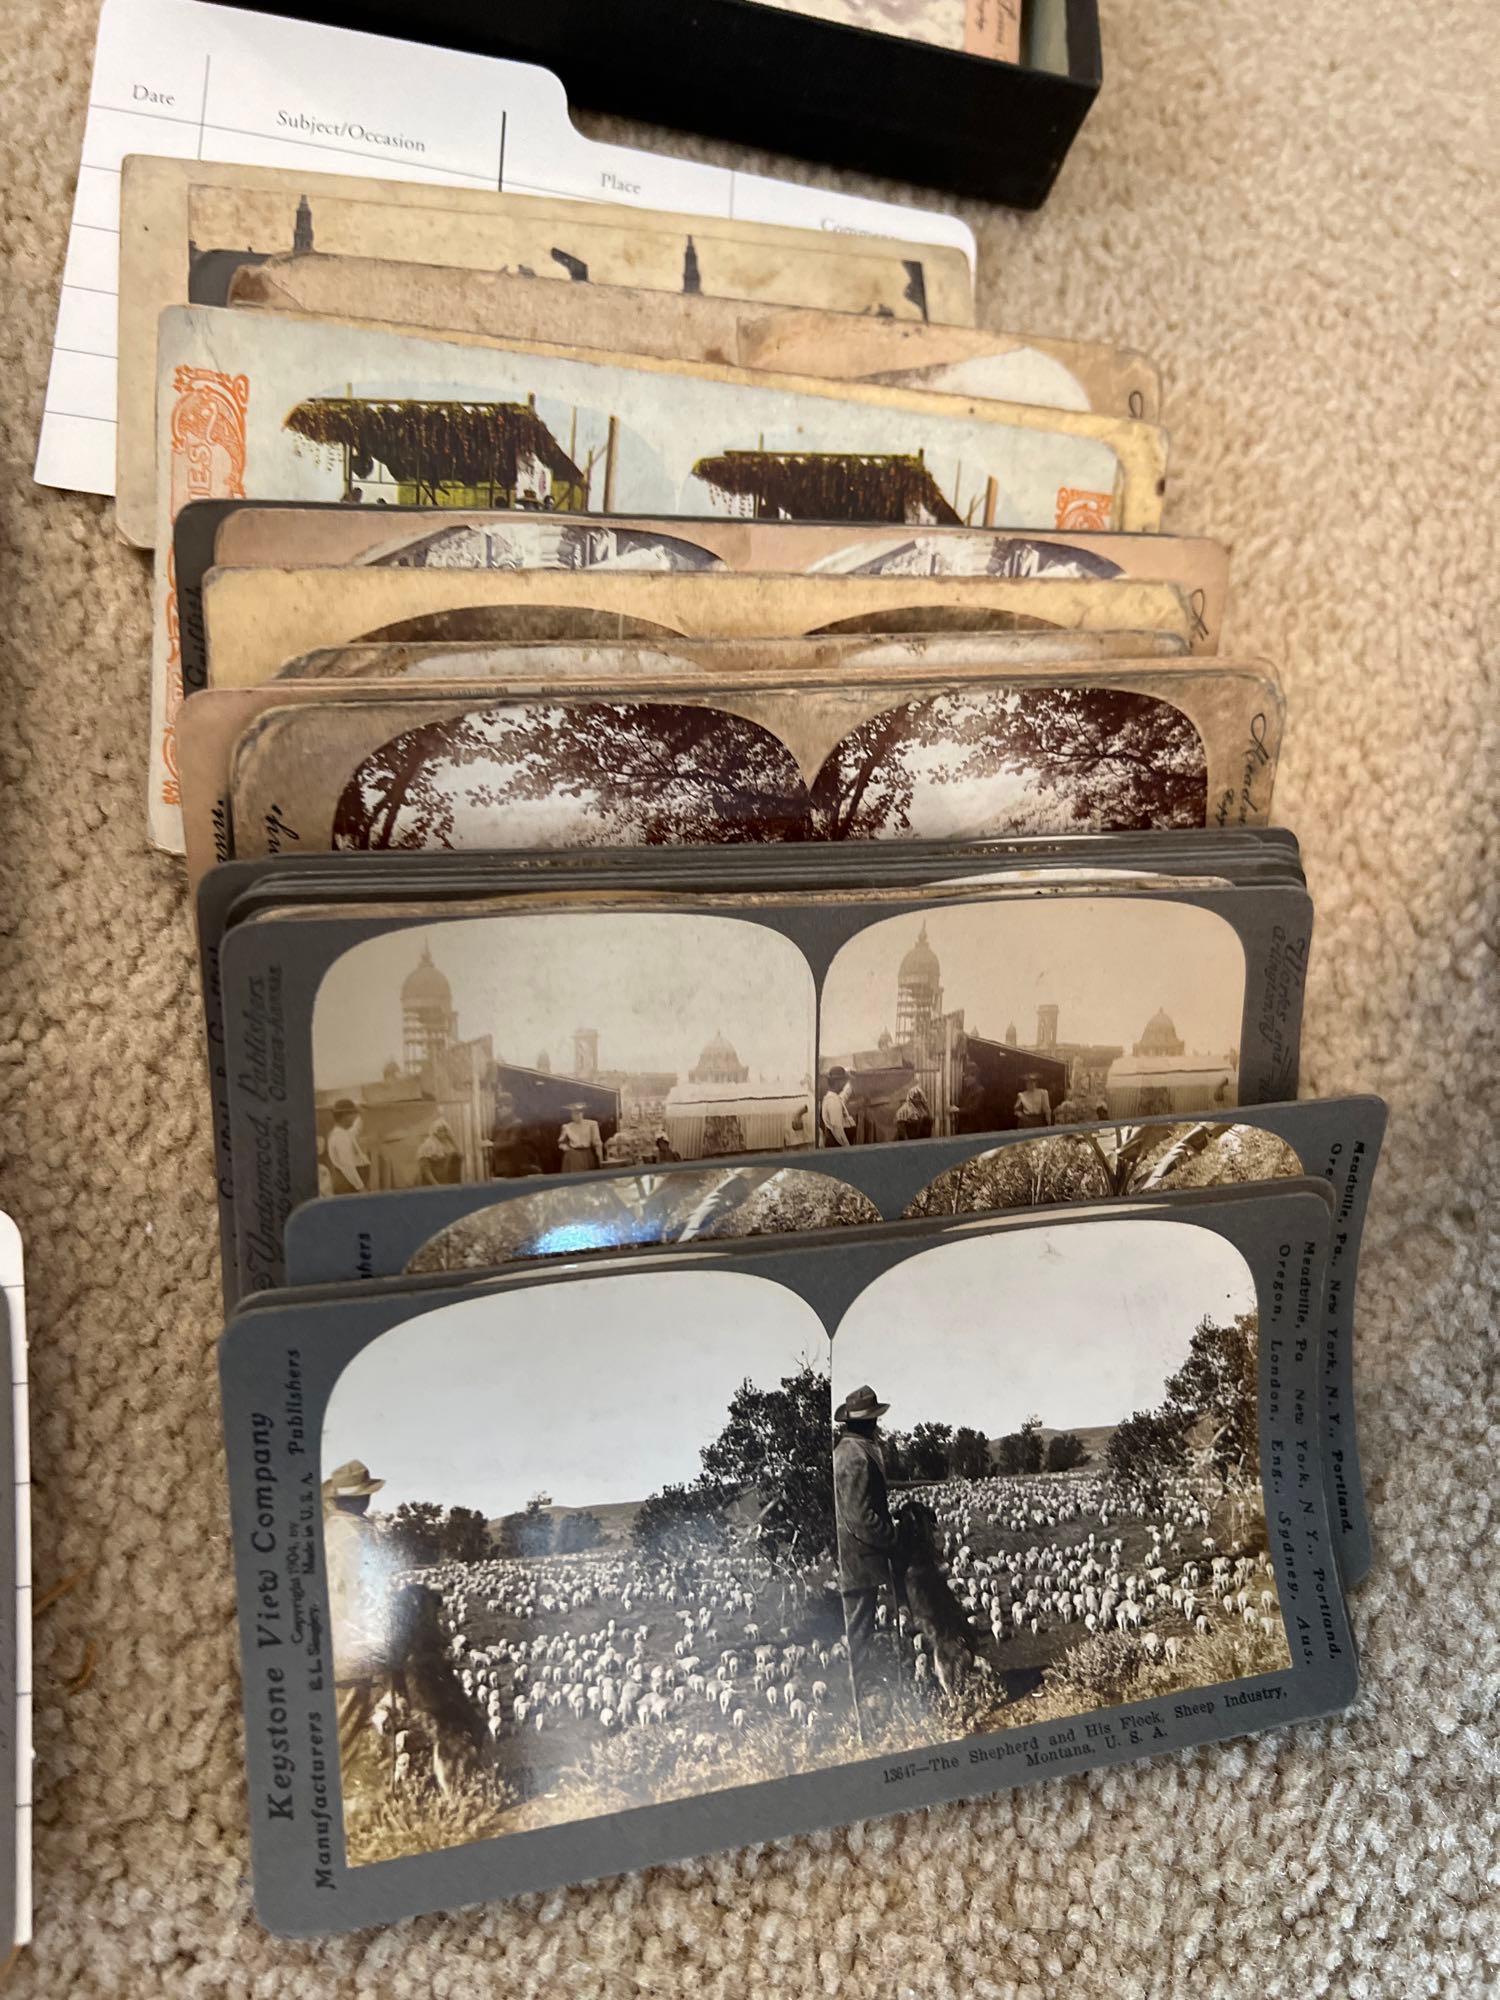 The Perfecscope Stereoscope Viewer with Viewing Cards